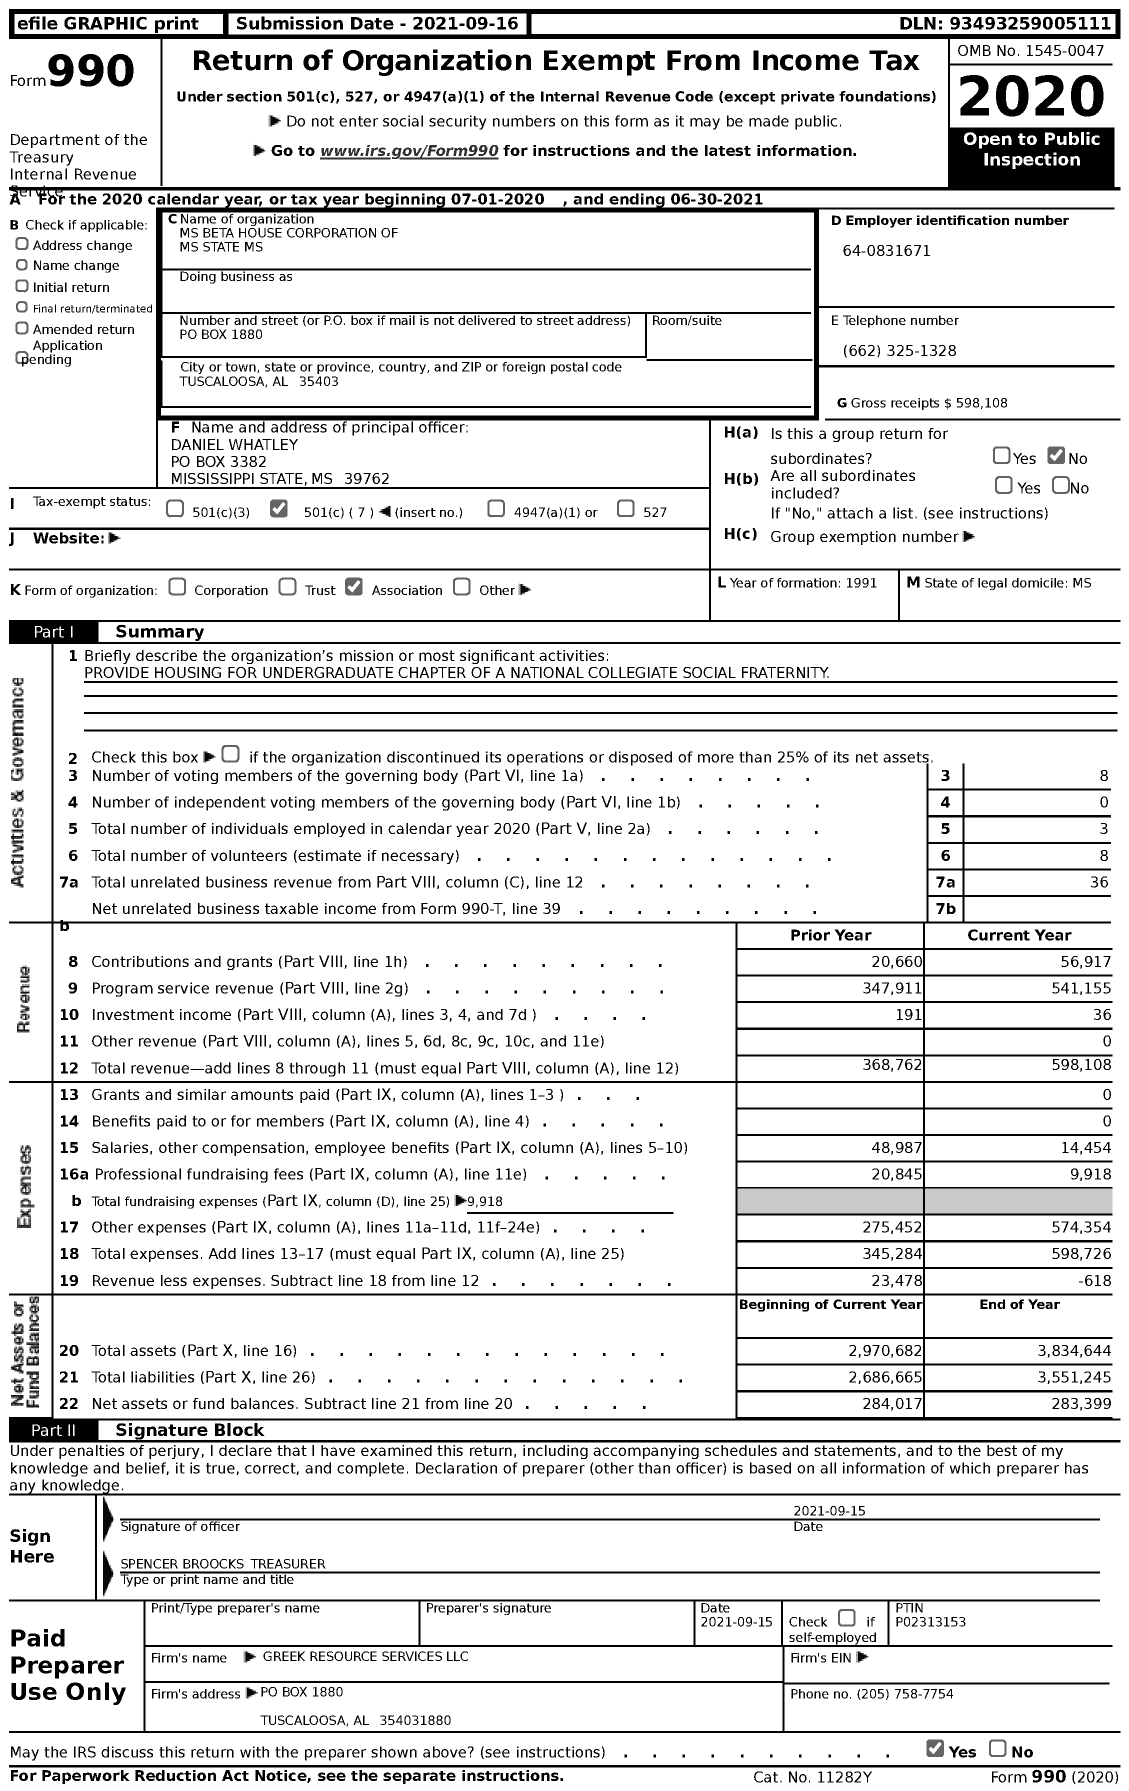 Image of first page of 2020 Form 990 for MS Beta House Corporation of MS State MS